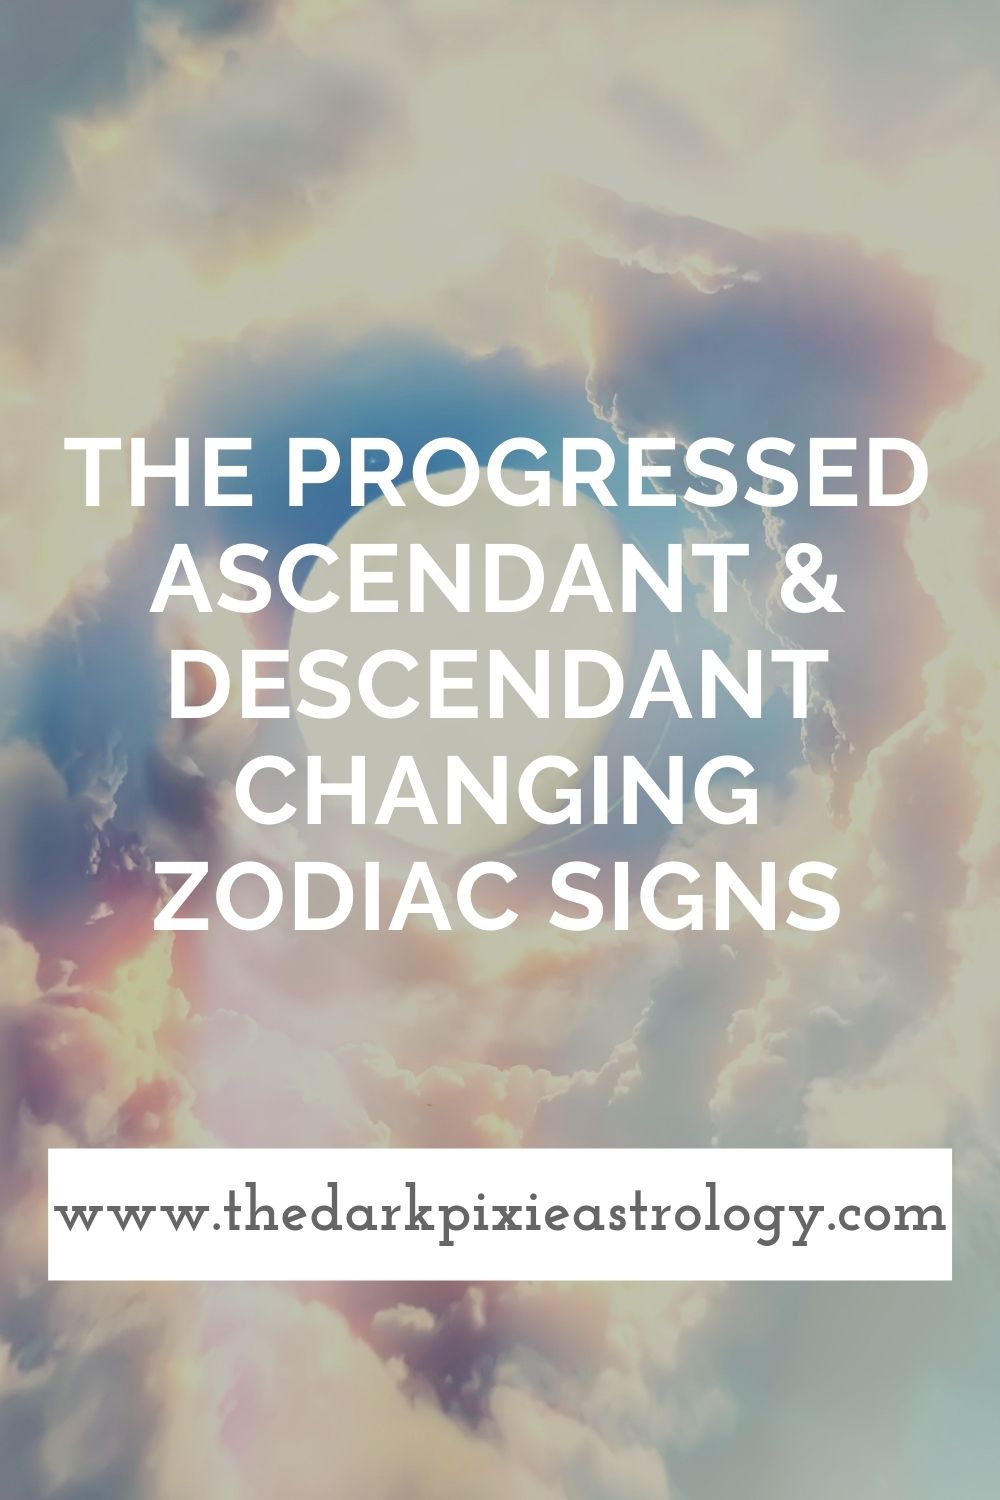 The Progressed Ascendant & Descendant Changing Zodiac Signs - The Dark Pixie Astrology